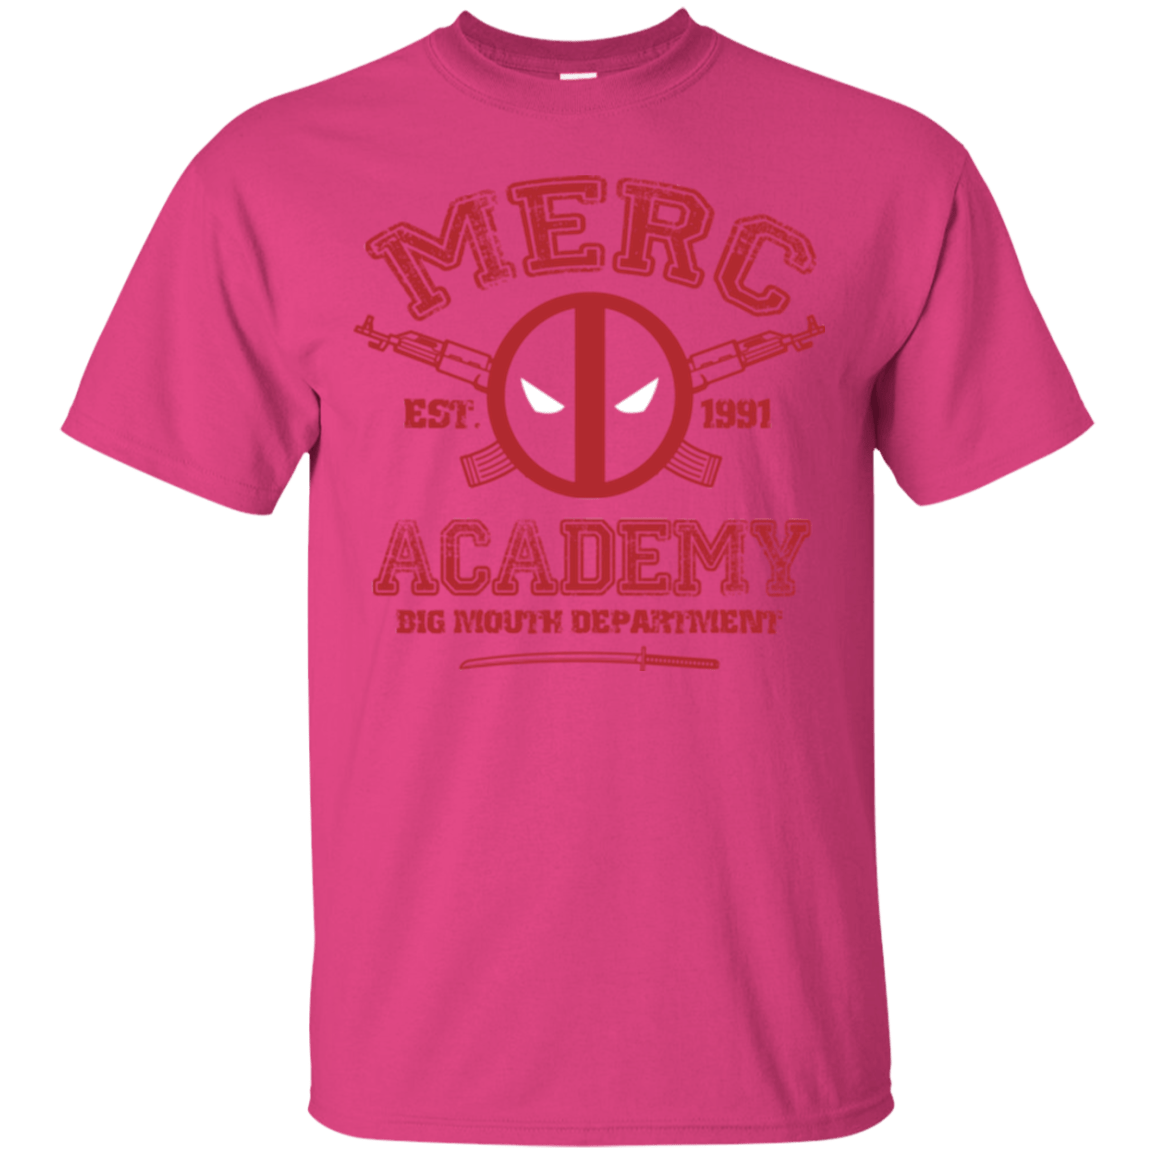 T-Shirts Heliconia / Small Merc Academy T-Shirt